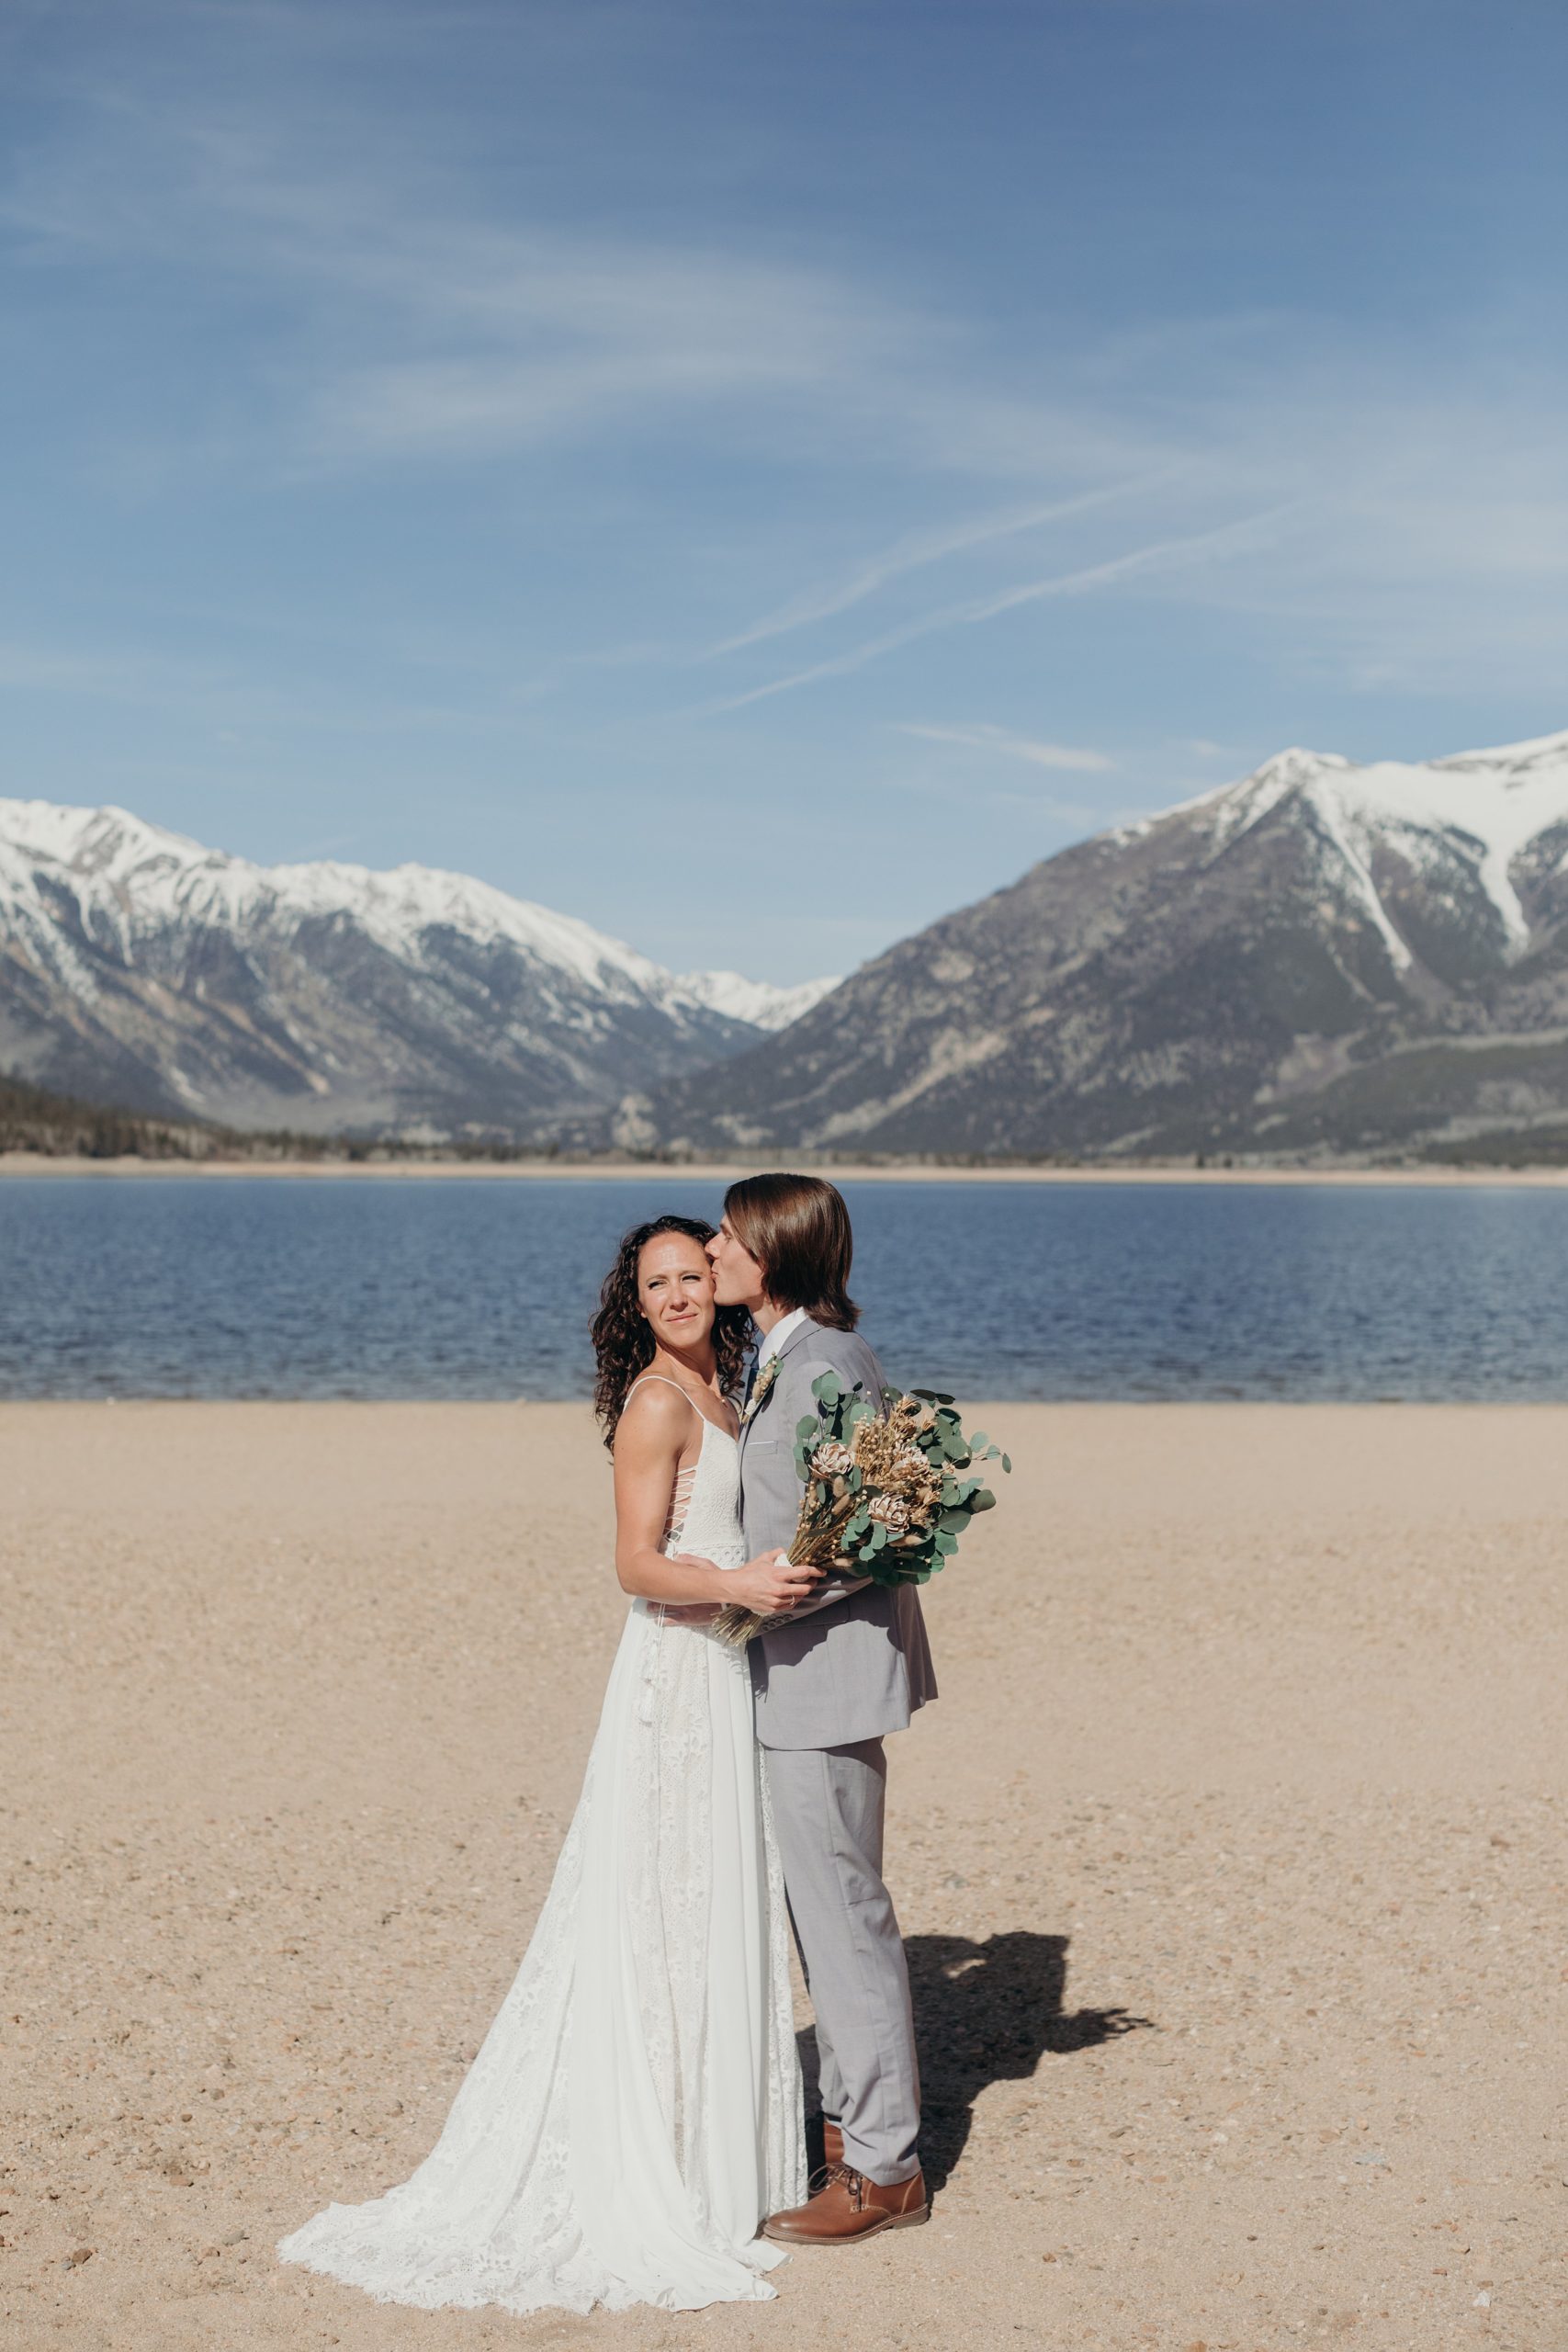 Twin lakes wedding, twin lakes elopement, colorado elopement, mountain elopement, lakeside elopement, elopement locations colorado, colorado elopement photographer, colorado wedding photographer, denver wedding photographer, outdoor wedding colorado, outdoor colorado mountain wedding, wedding venues in the mountains